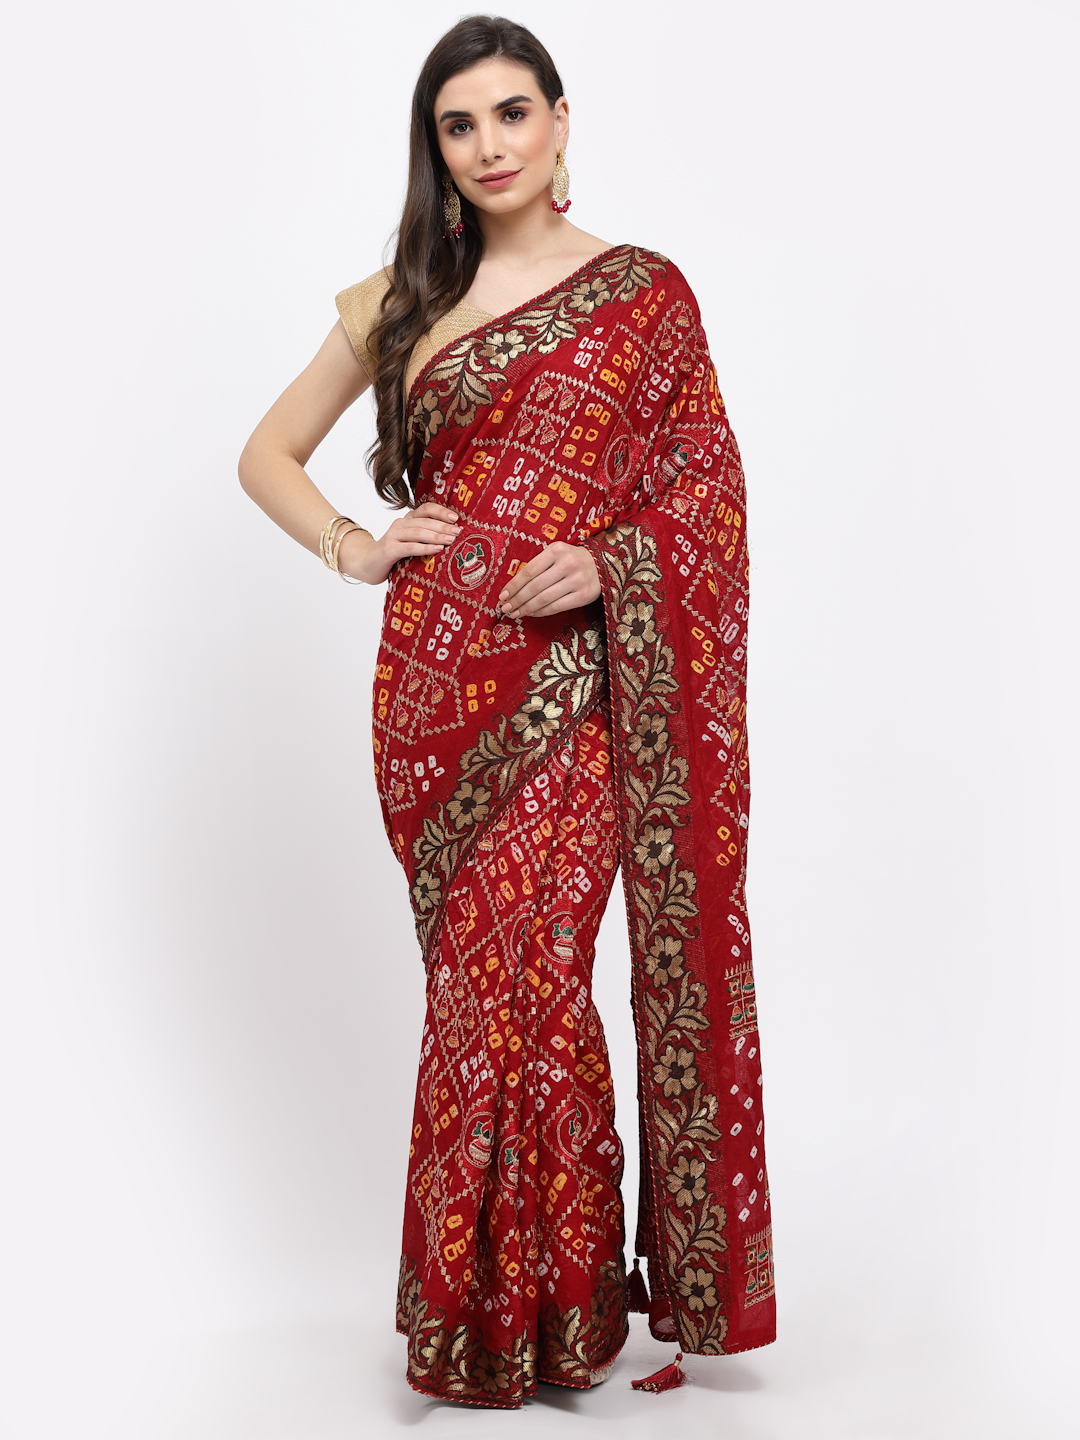 Women Bandhani With Embroidery And Zari Weaving Silk Saree And Blouse Maroon